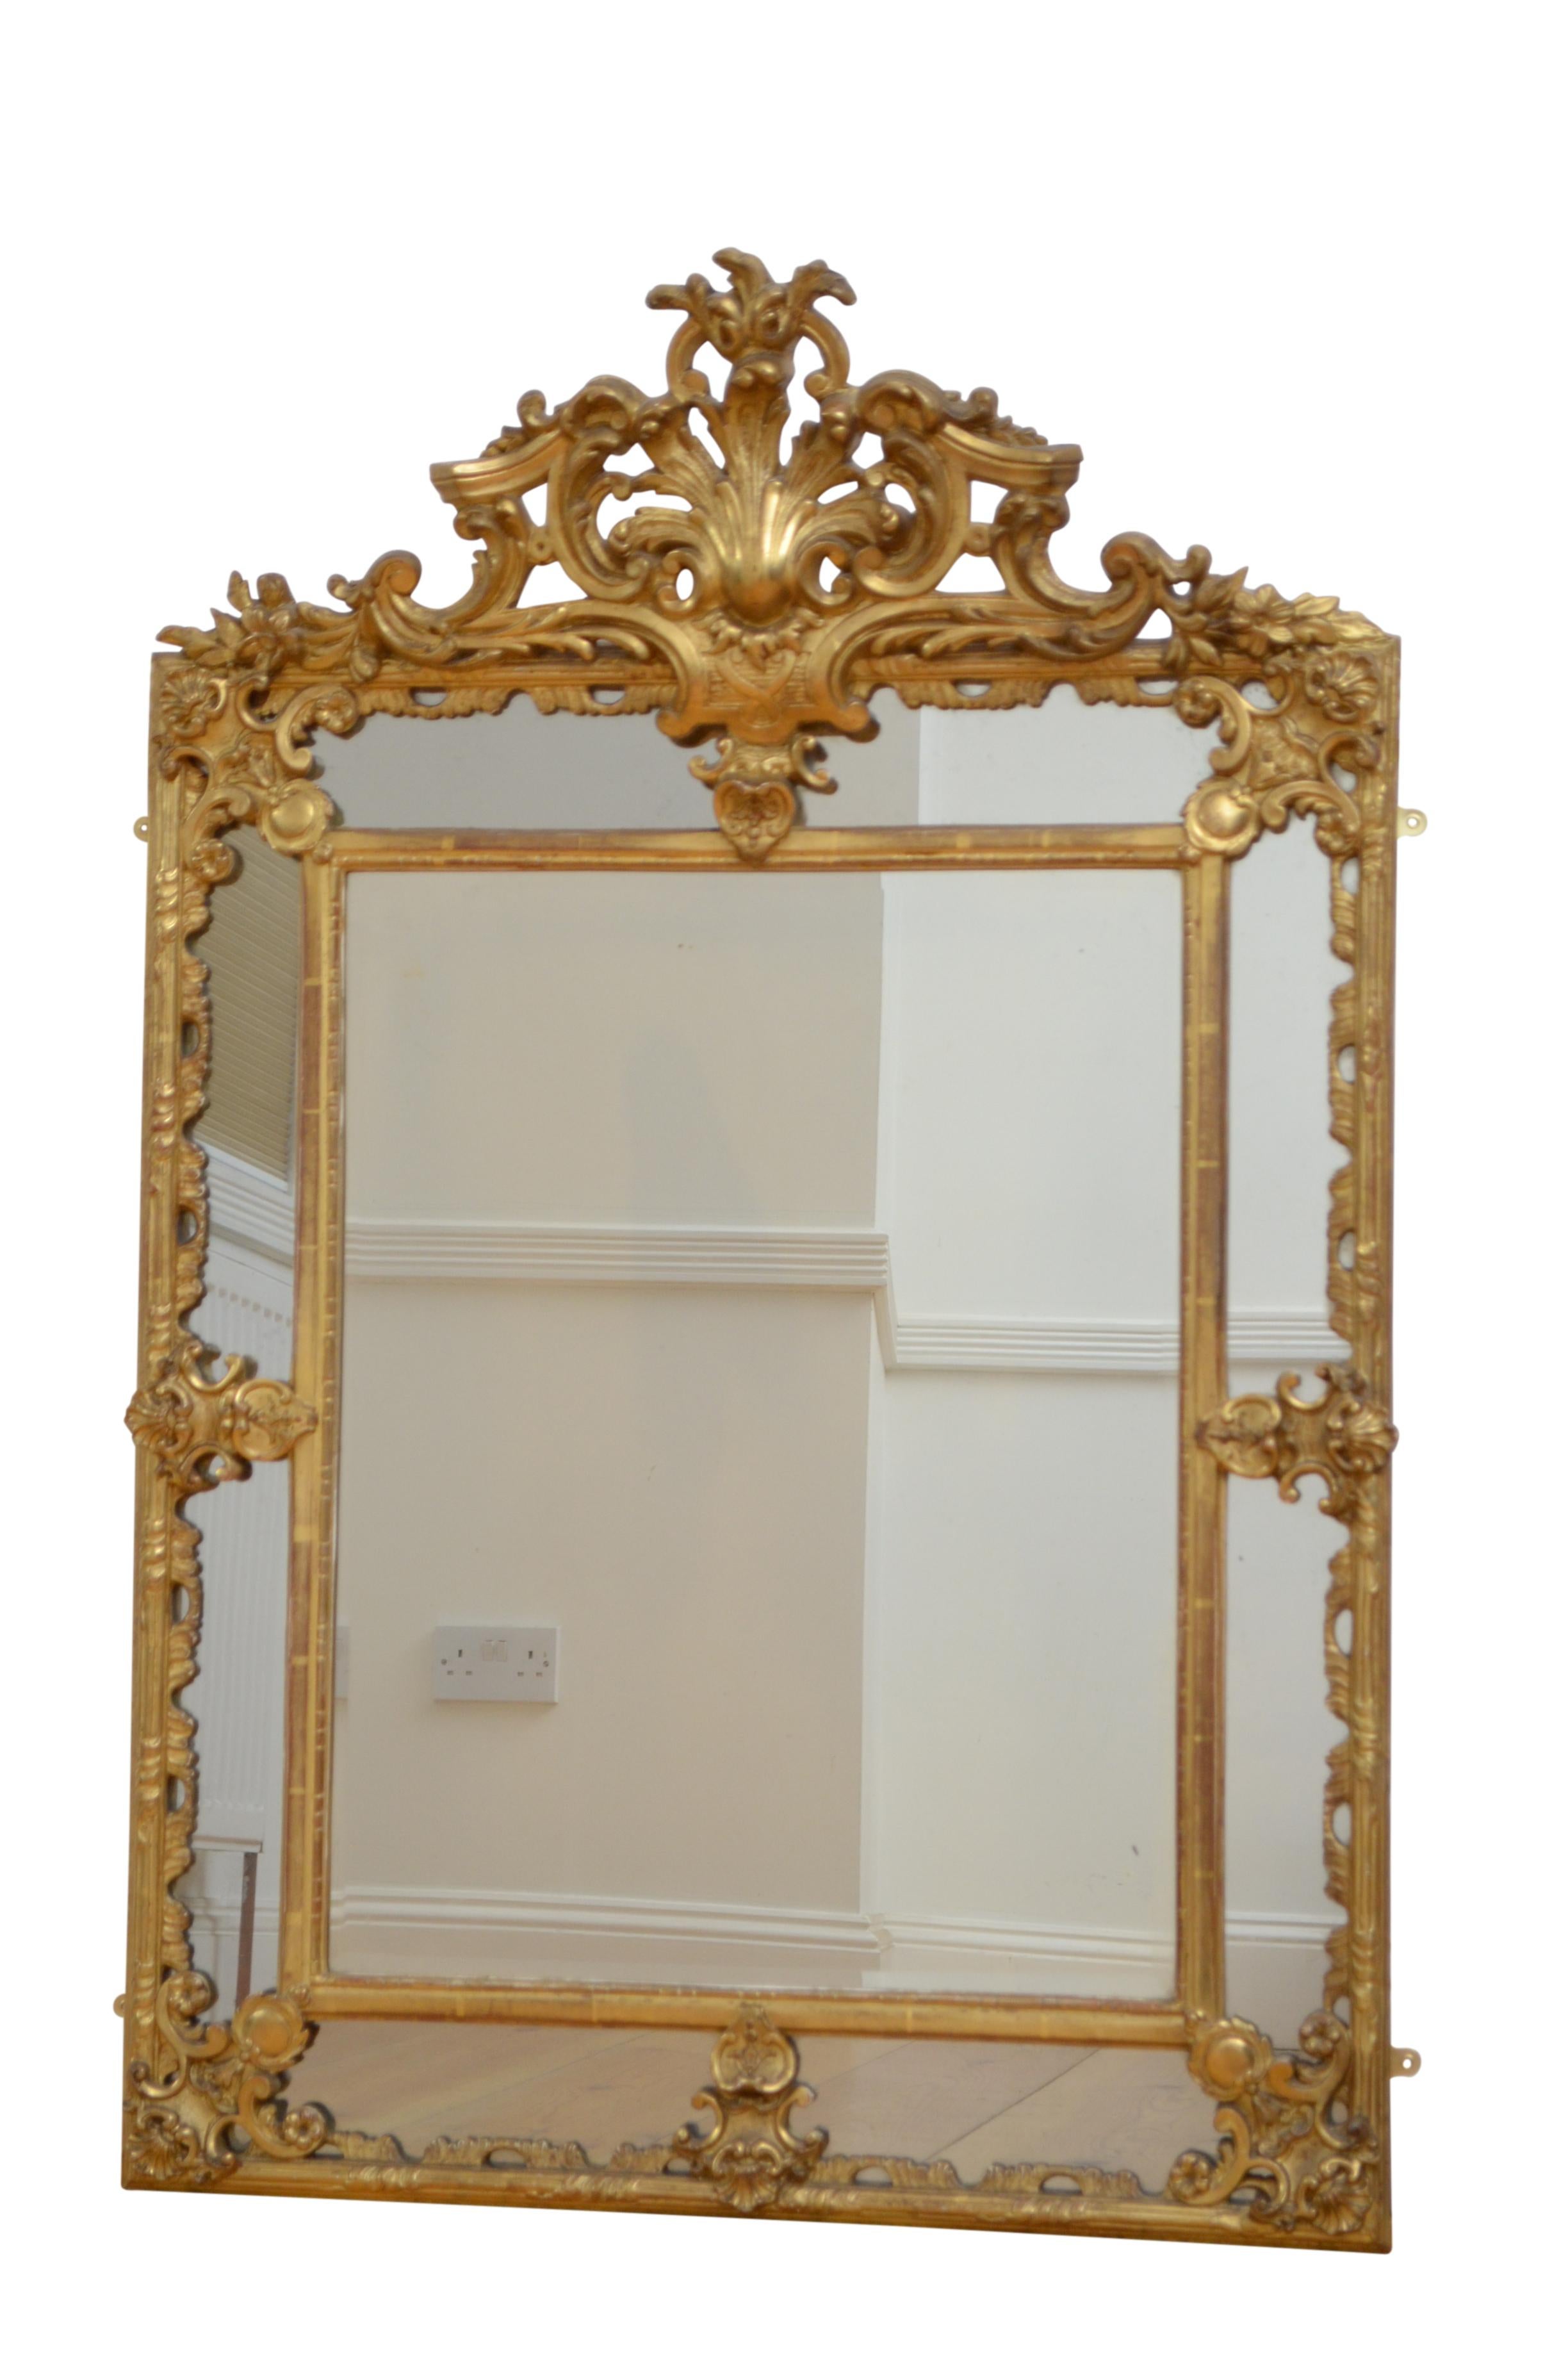 P0192 Fine antique giltwood wall mirror, having original bevelled edge centre mirror flanked by rectangular mirrors in moulded and finely carved gilded frame with elaborate scroll crest to centre. 
This antique mirror retains its original bevelled